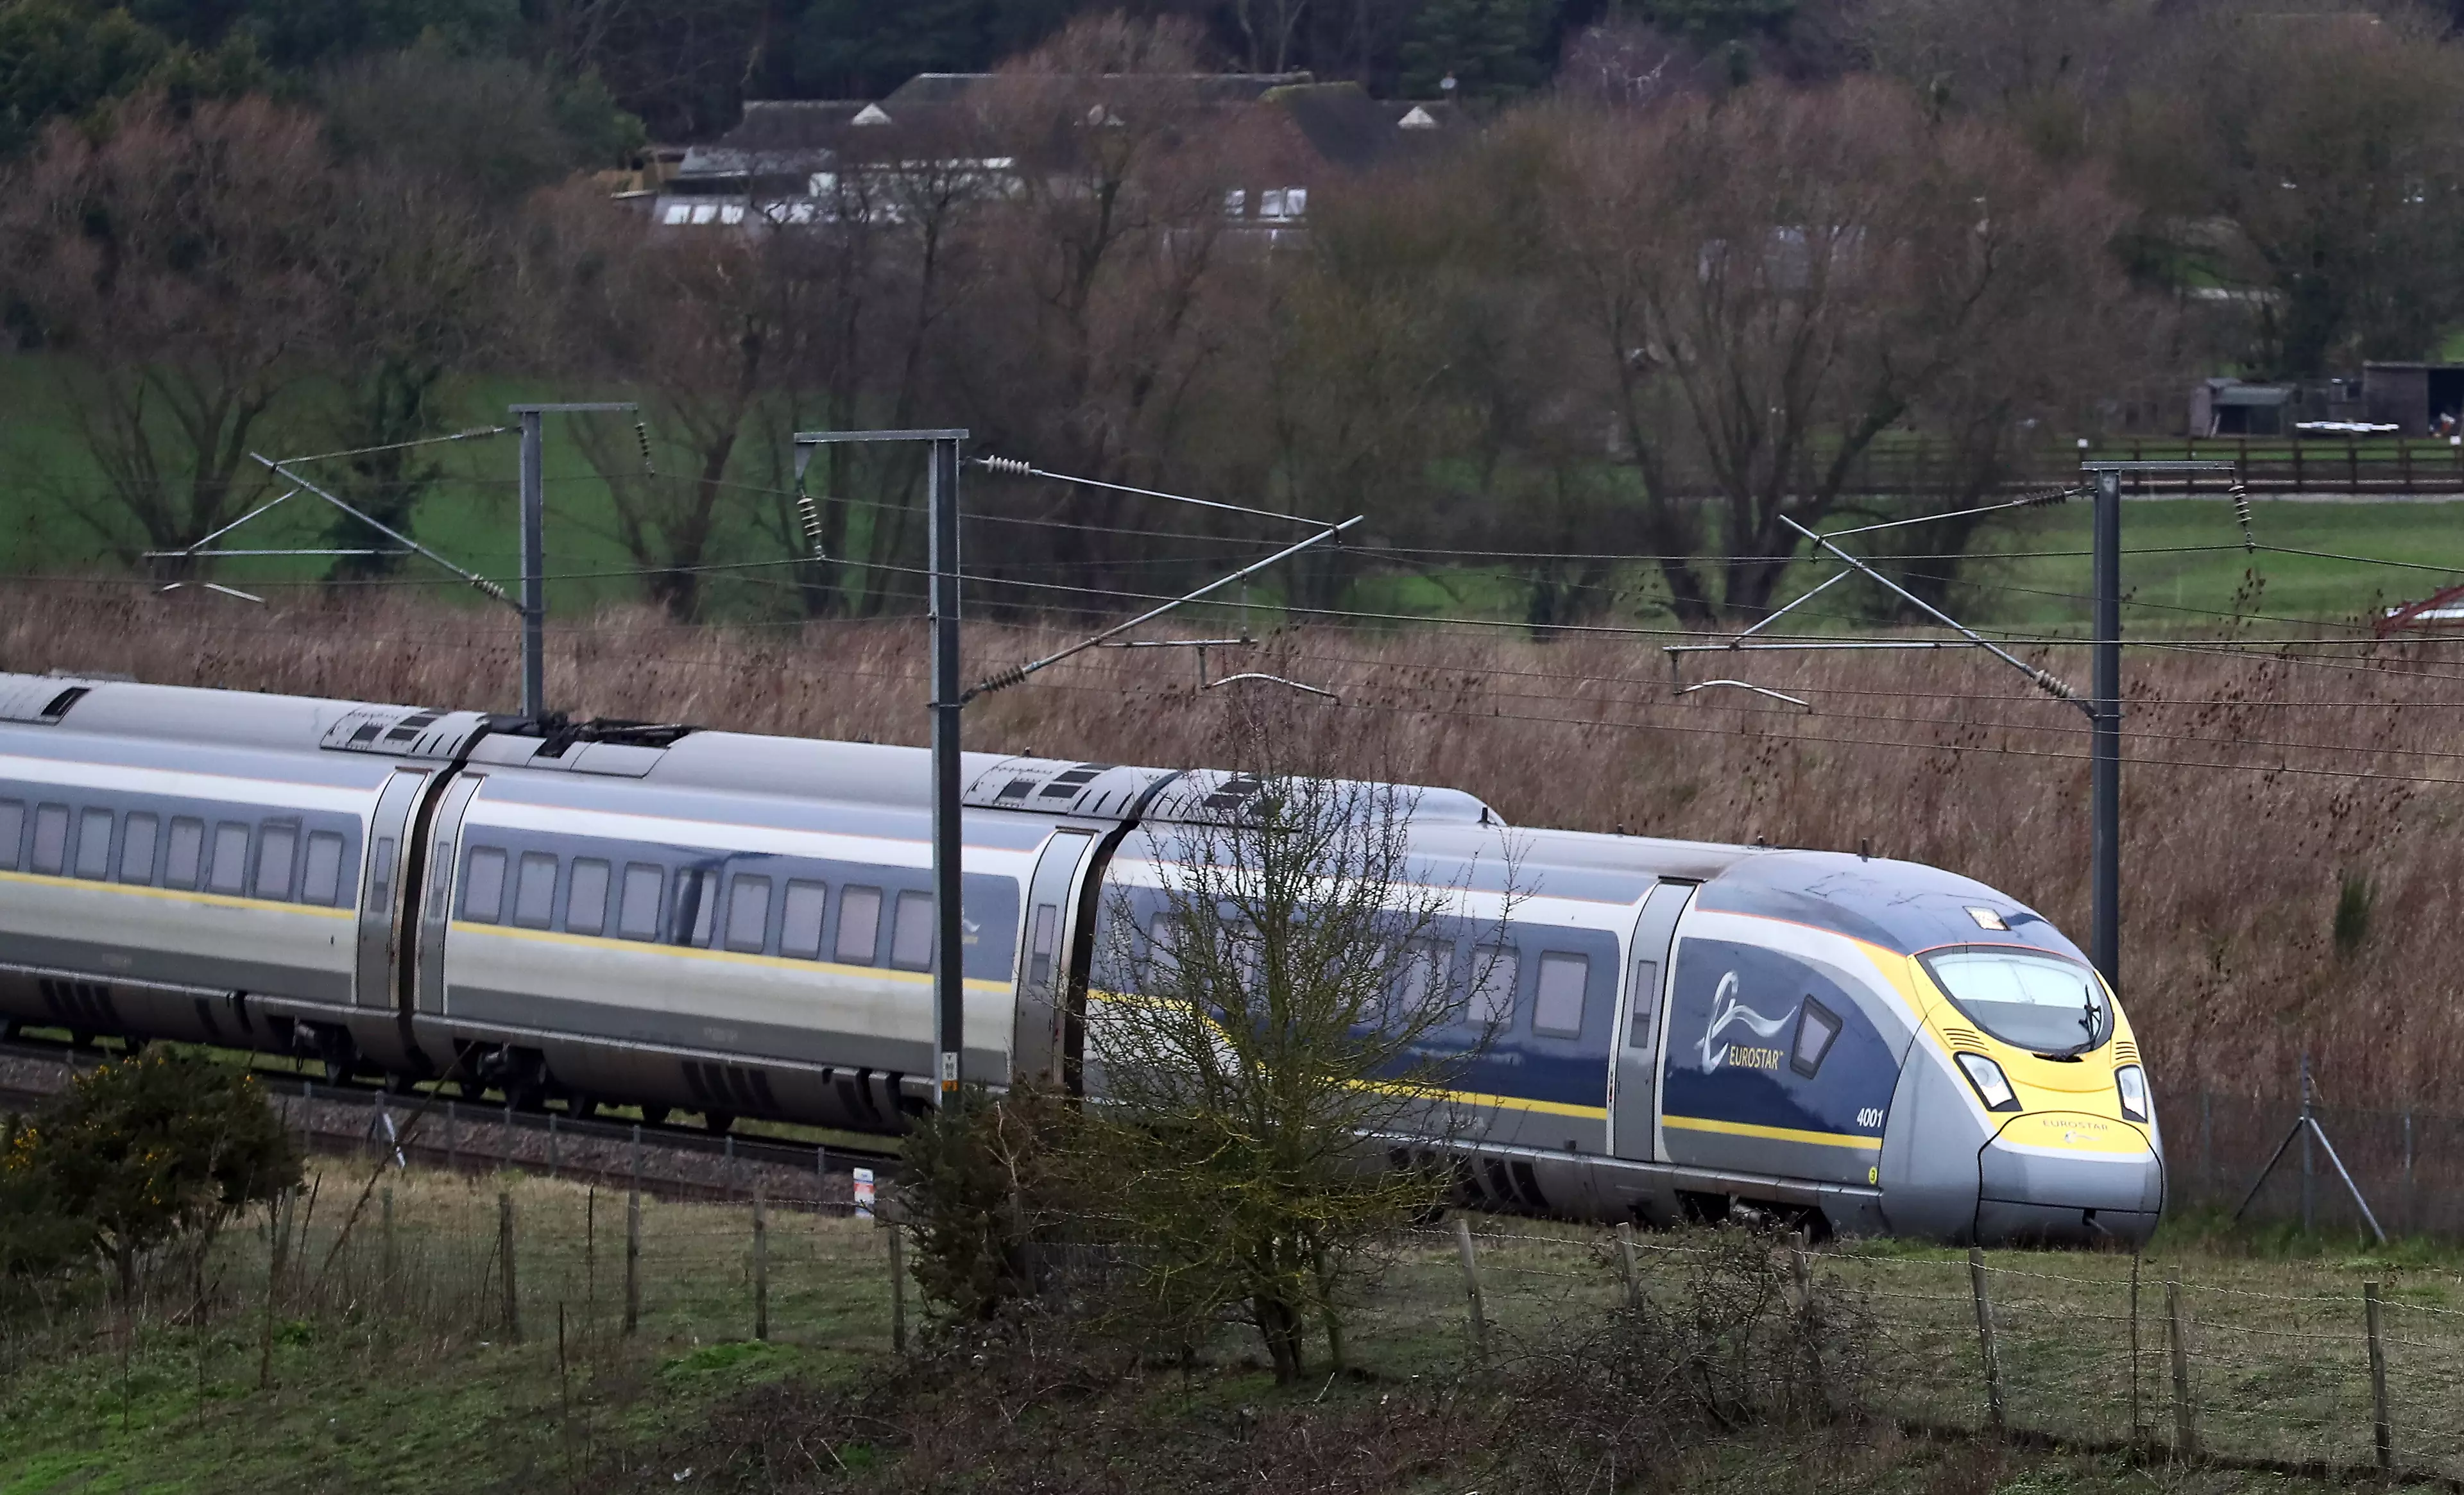 The high speed train will now travel direct to Amsterdam (